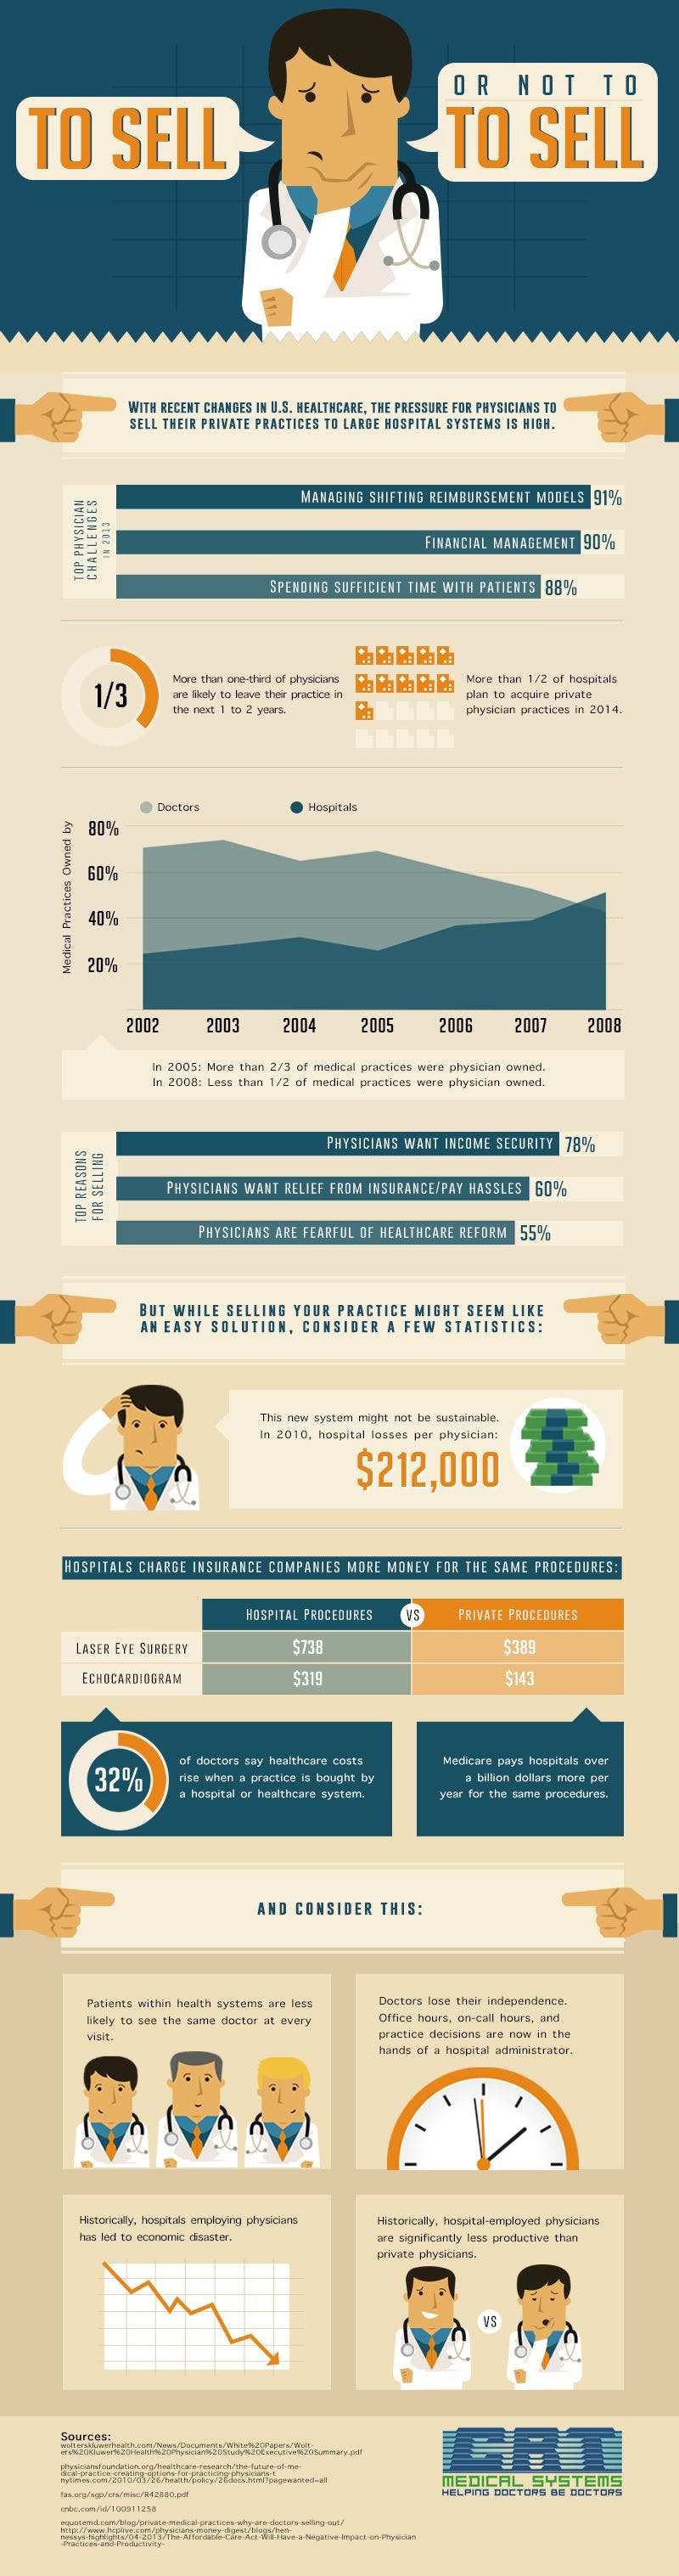 Infographic: To Sell or Not to Sell Your Medical Practice 